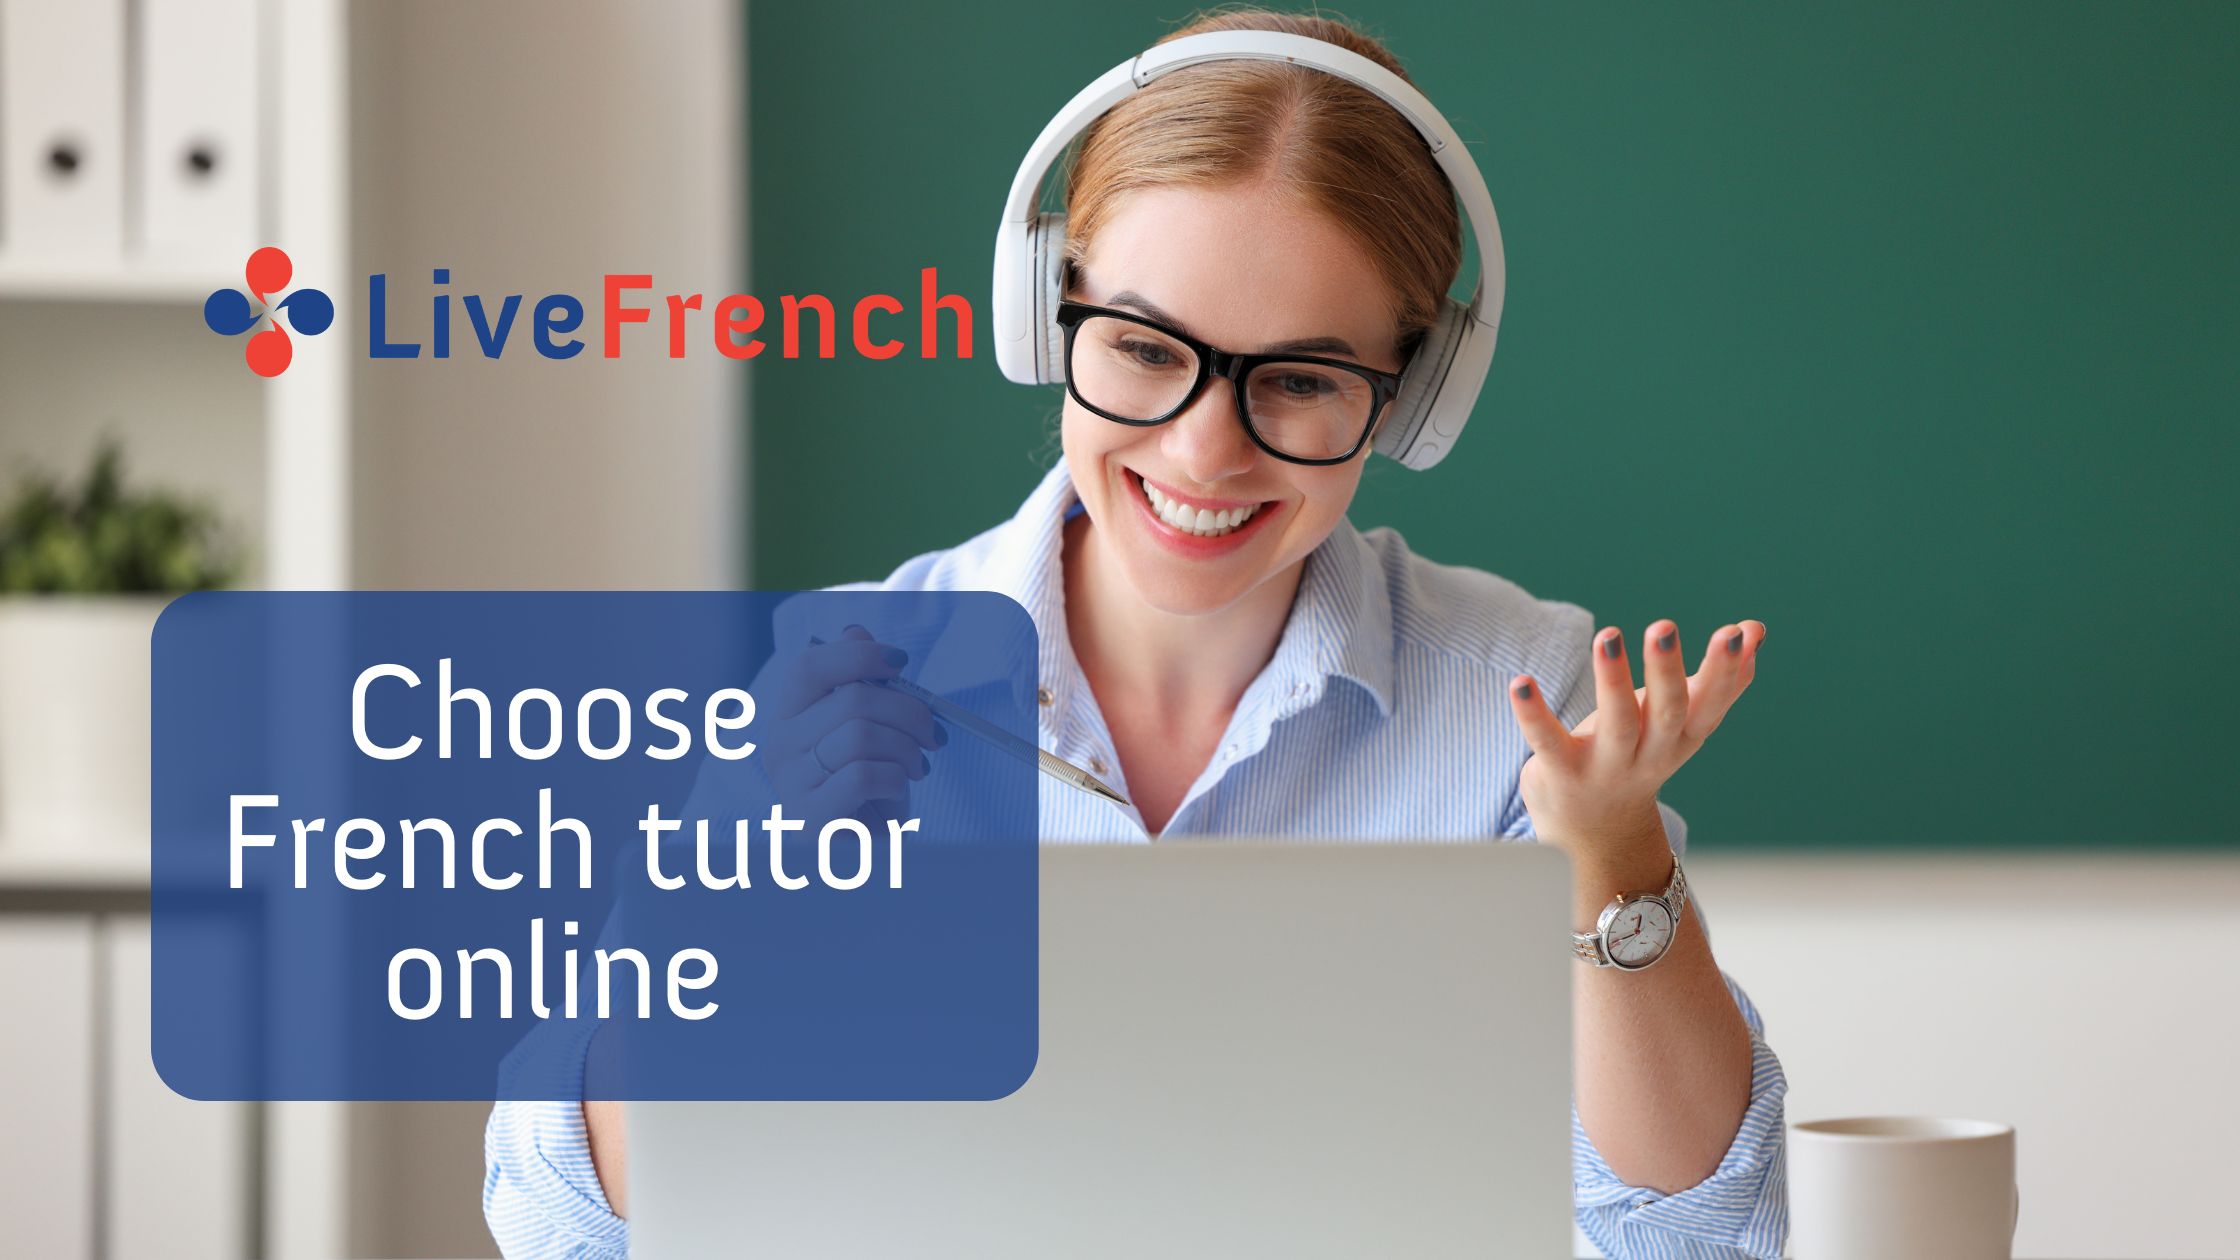 How to choose a good French tutor online by Skype?